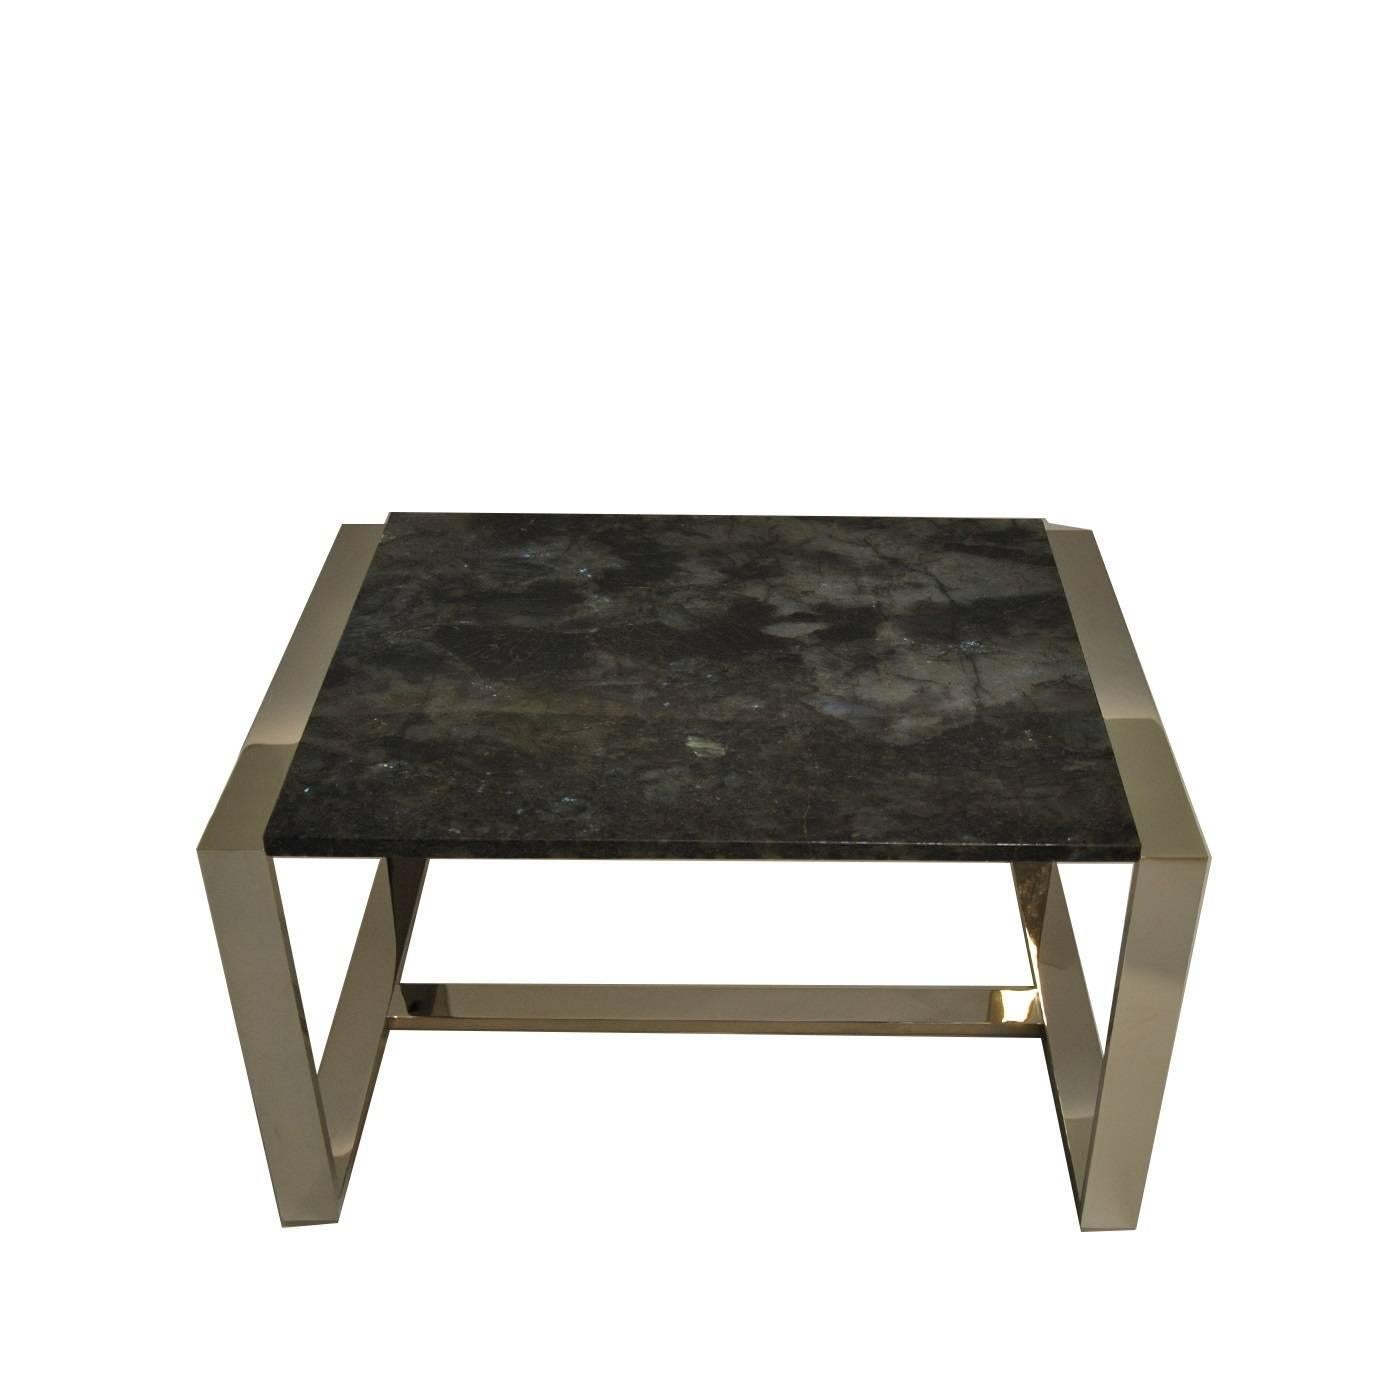 This spectacular coffee table combines natural materials, hand-cut in their original form, and man-made components creating a piece that is the perfect balance of the two. The top of this table is a striking rectangular piece of labradorite from